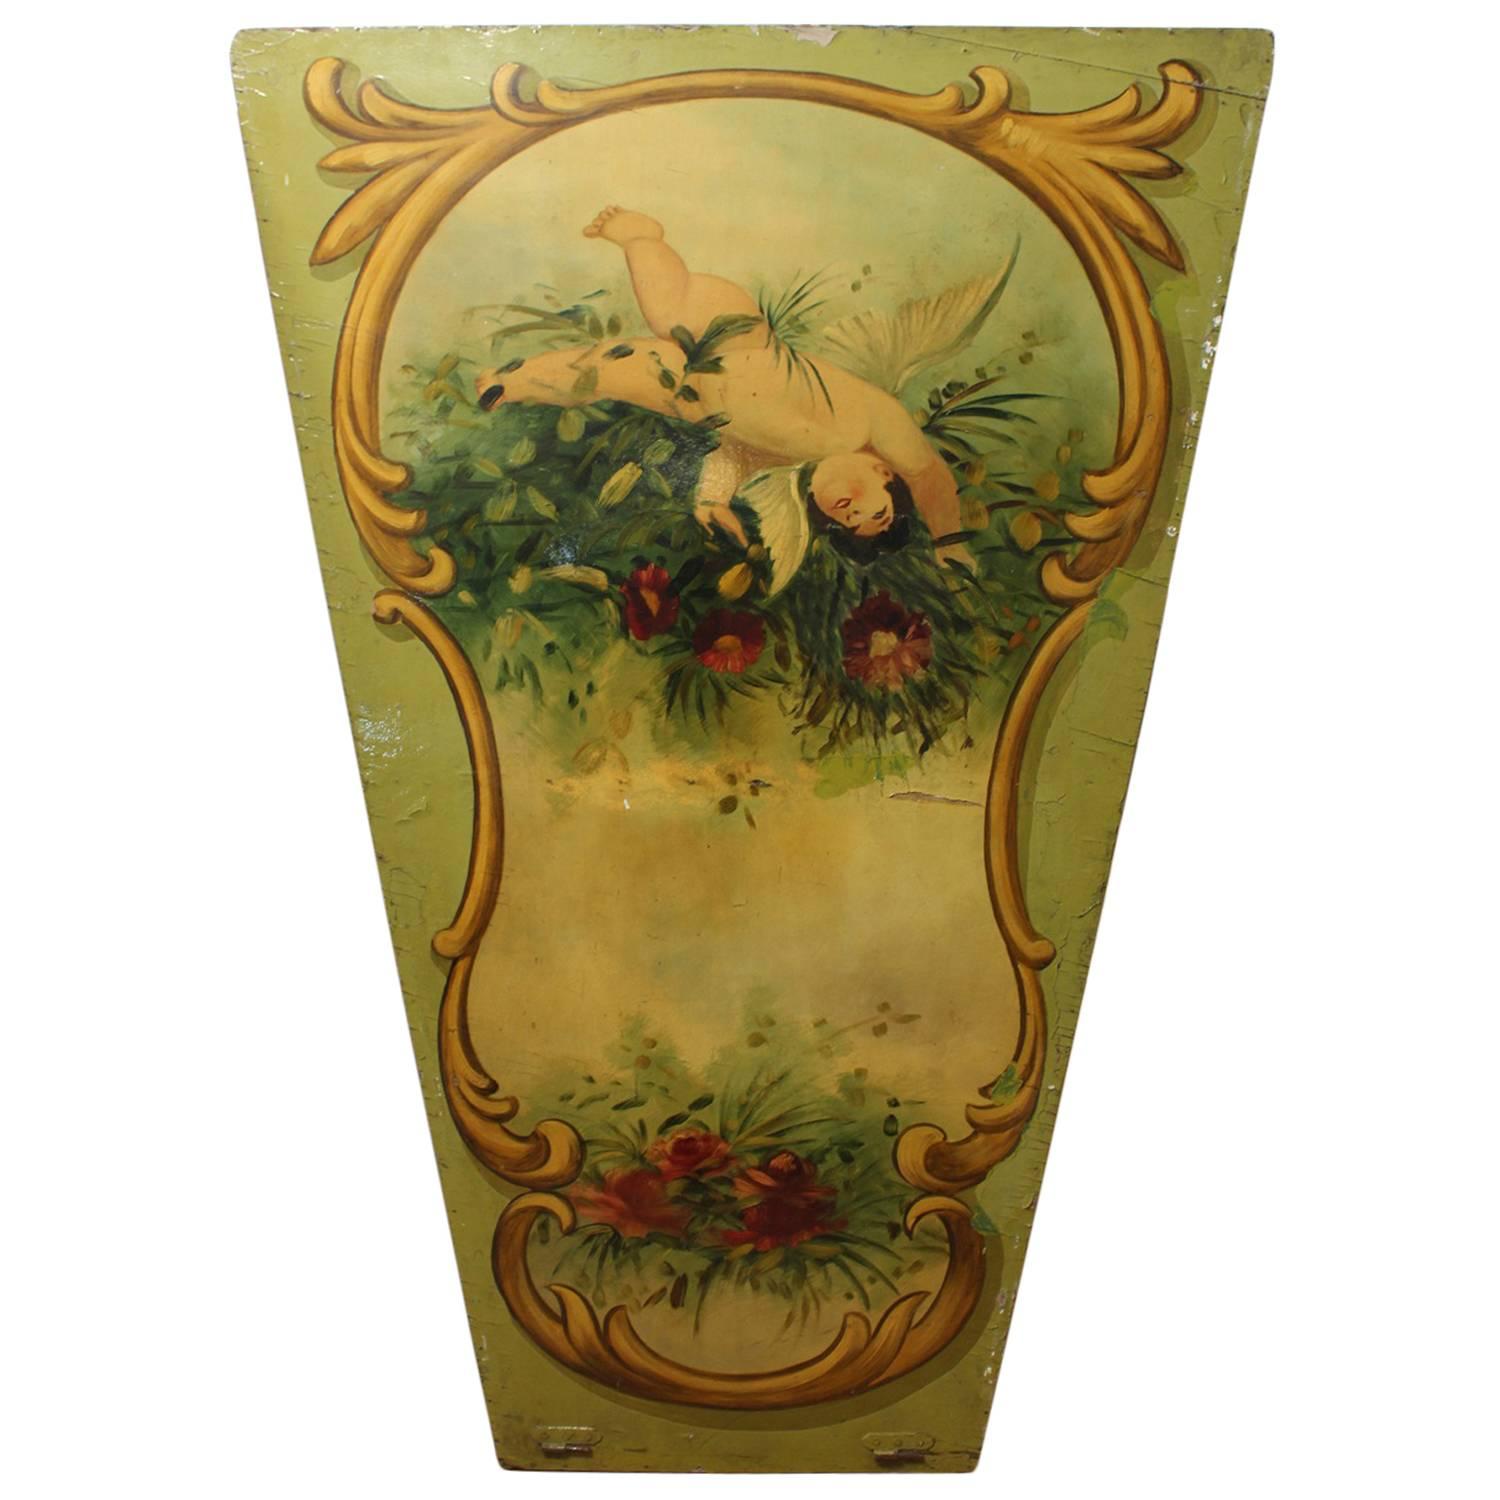   Large 1930s Decorative Carnival Ride Hand-Painted Wood Panel For Sale